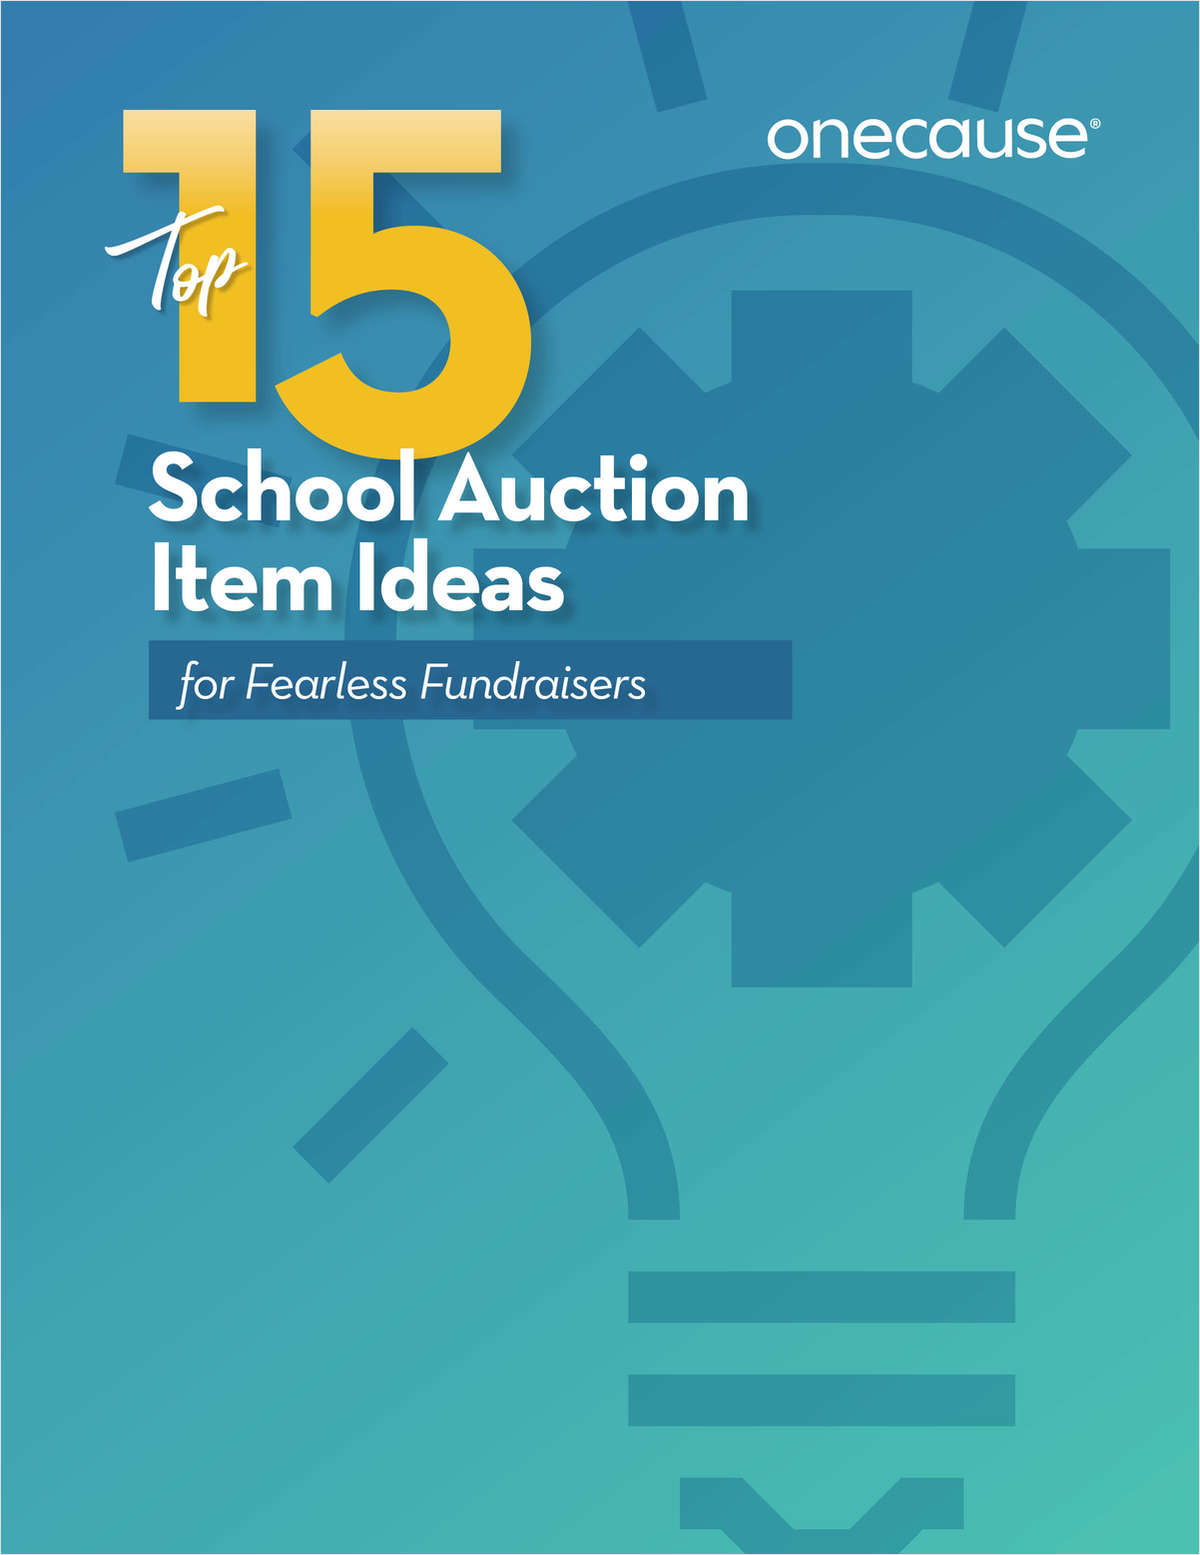 Top 15 School Auction Item Ideas for Fearless Fundraisers